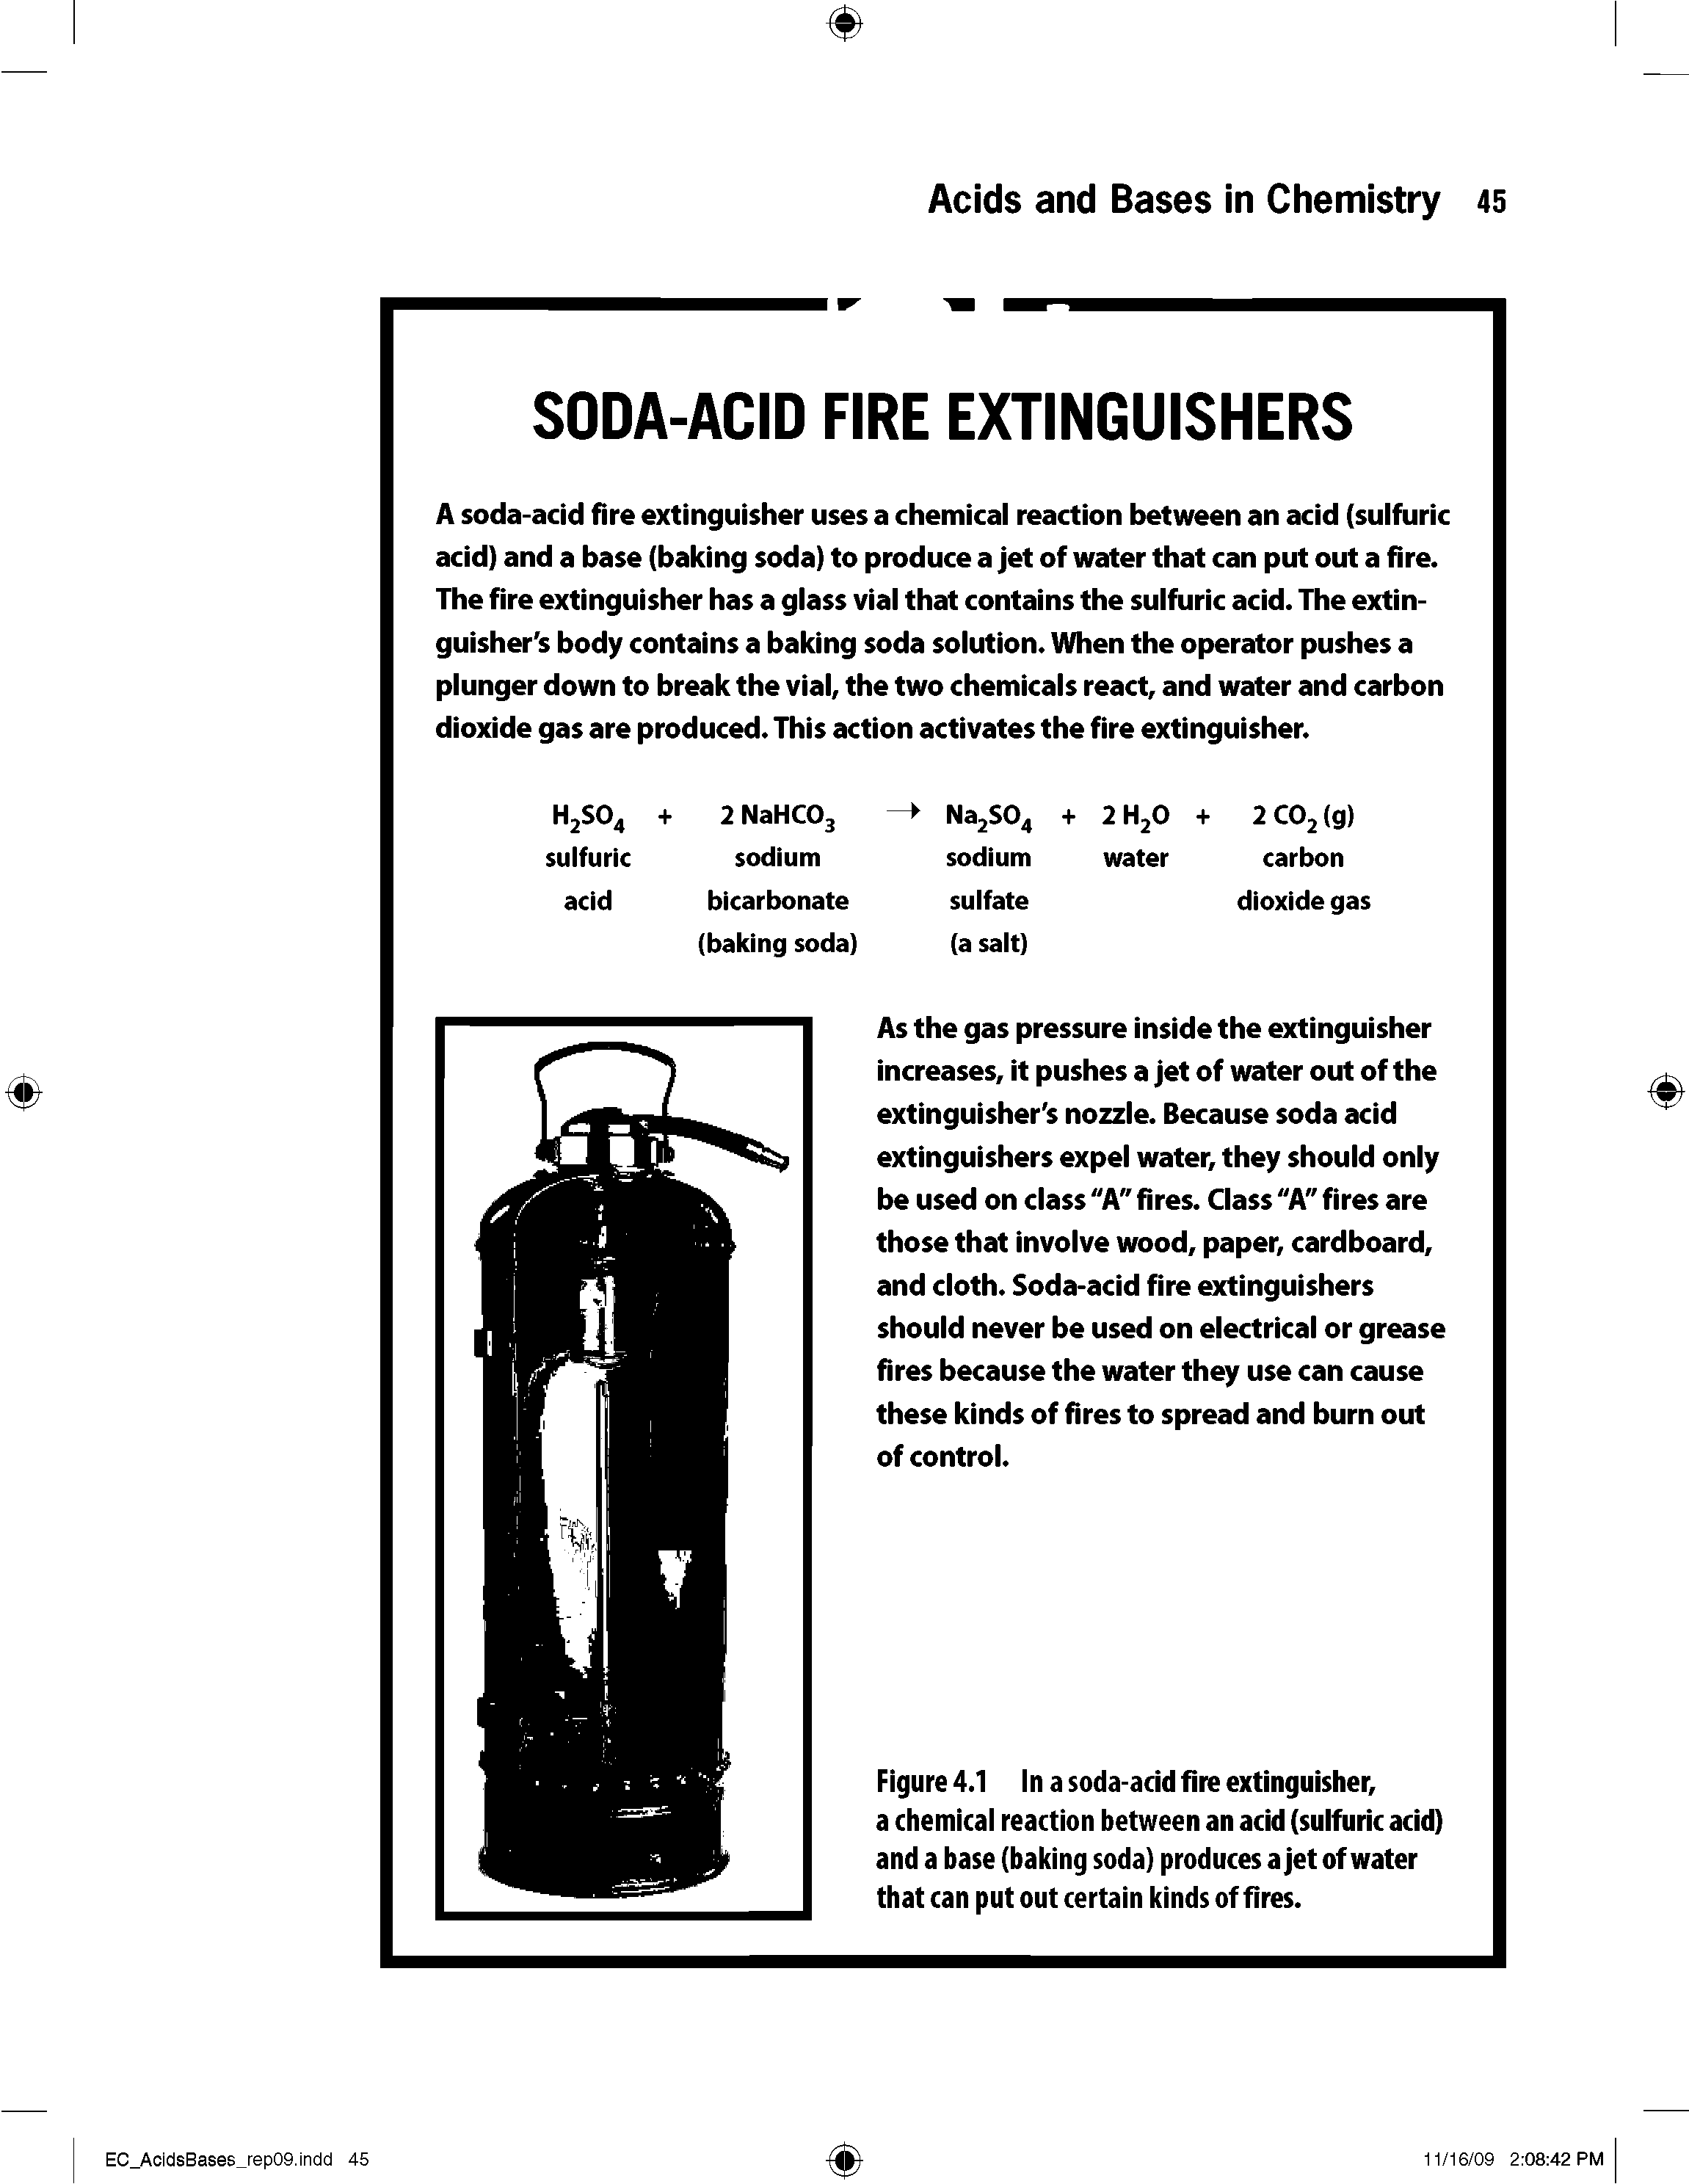 Figure 4.1 In a soda-acid fire extinguisher, a chemical reaction between an acid (sulfuric acid) and a base (baking soda) produces a jet of water that can put out certain kinds of fires.